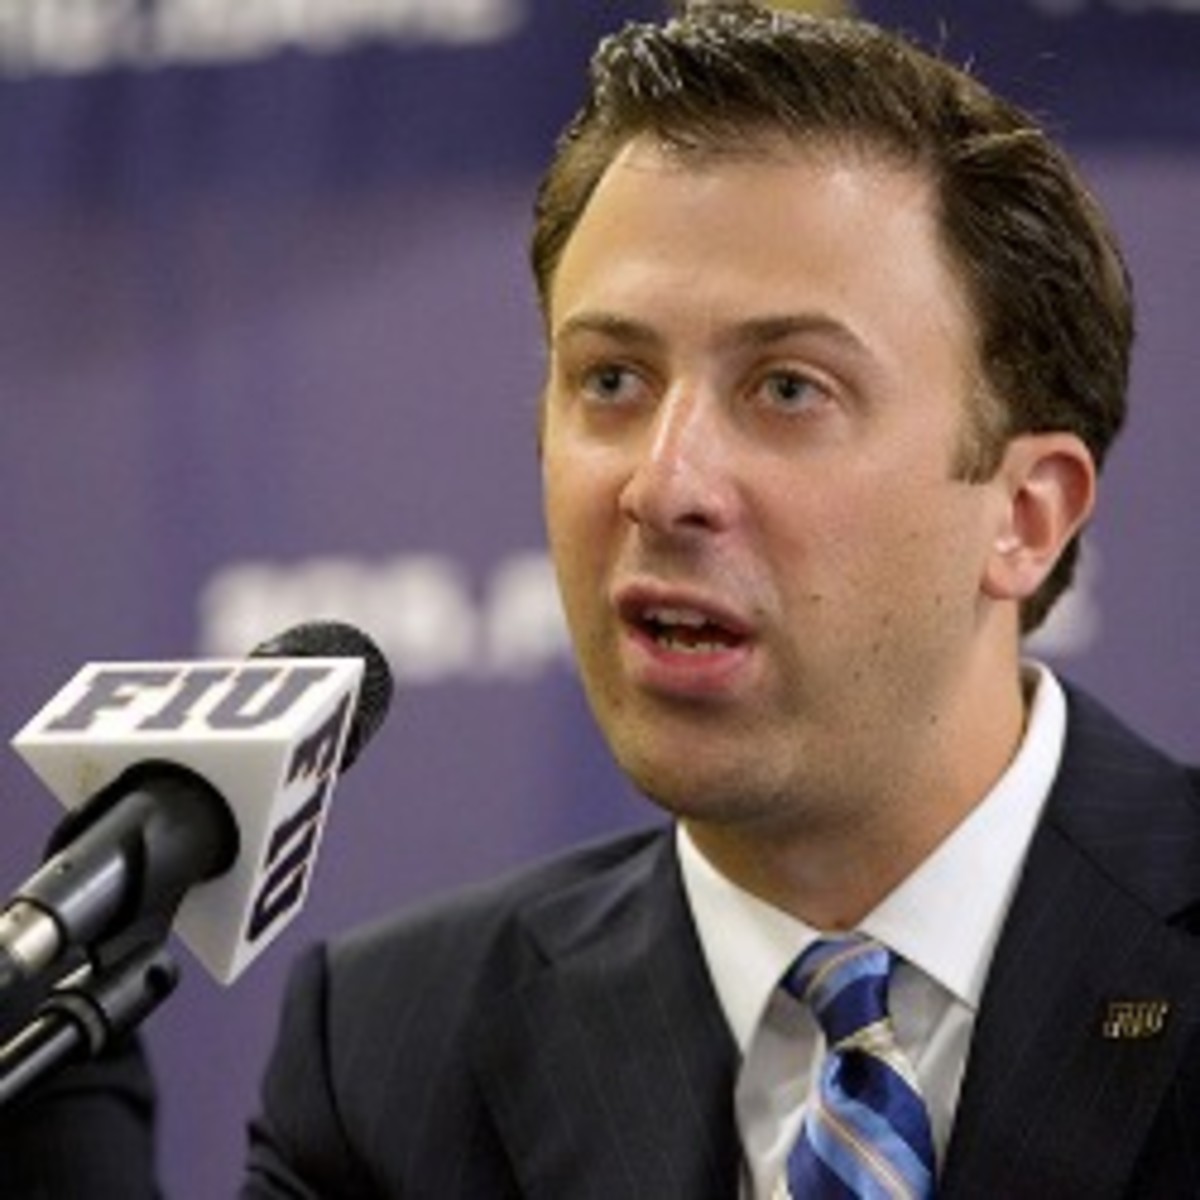 Richard Pitino was hired as the new men's basketball coach at Minnesota. (Photo provided by the AP)